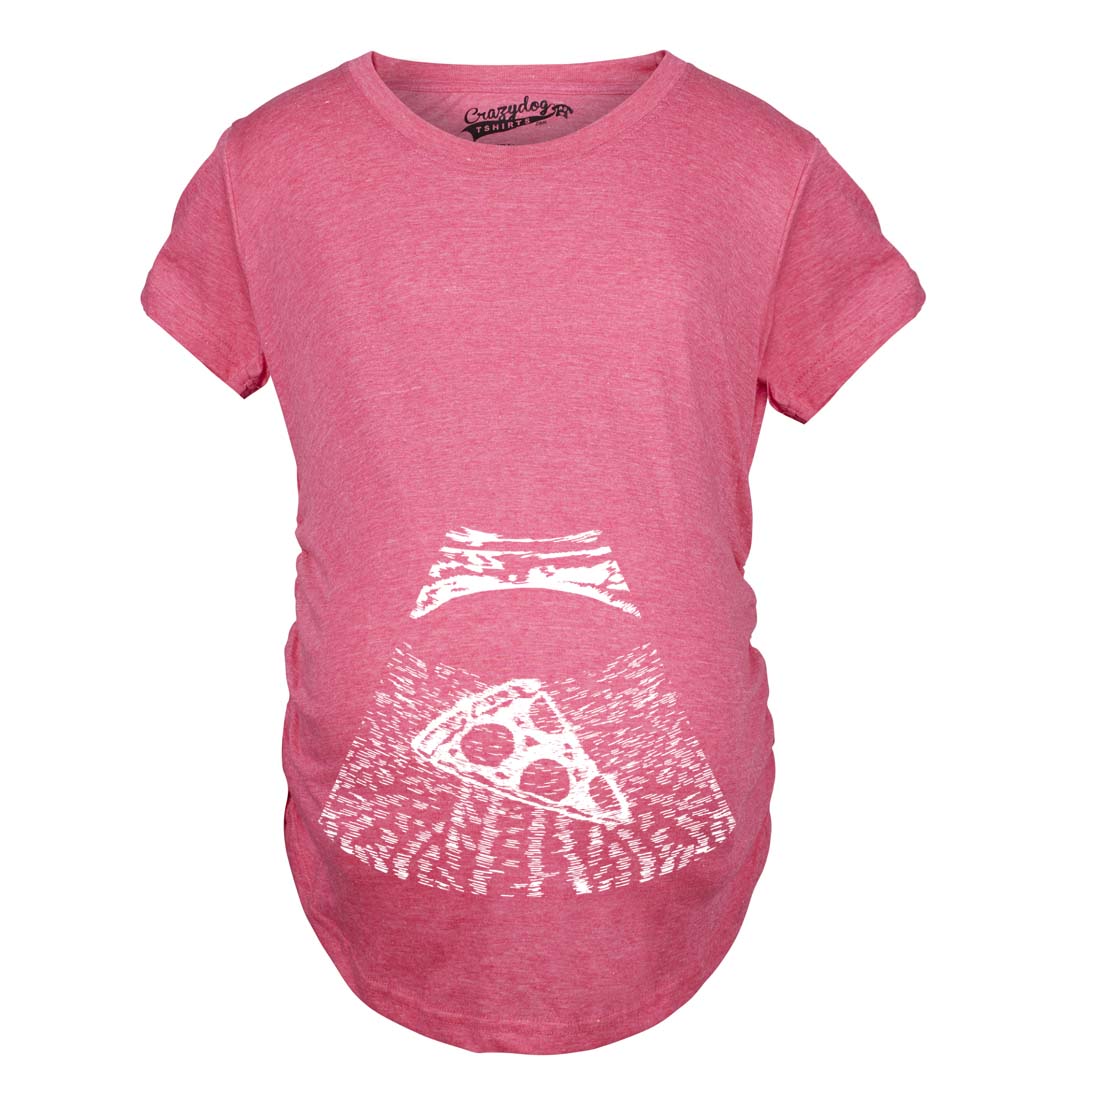 Funny Pink Ultrasound Pizza Maternity T Shirt Nerdy Food Tee